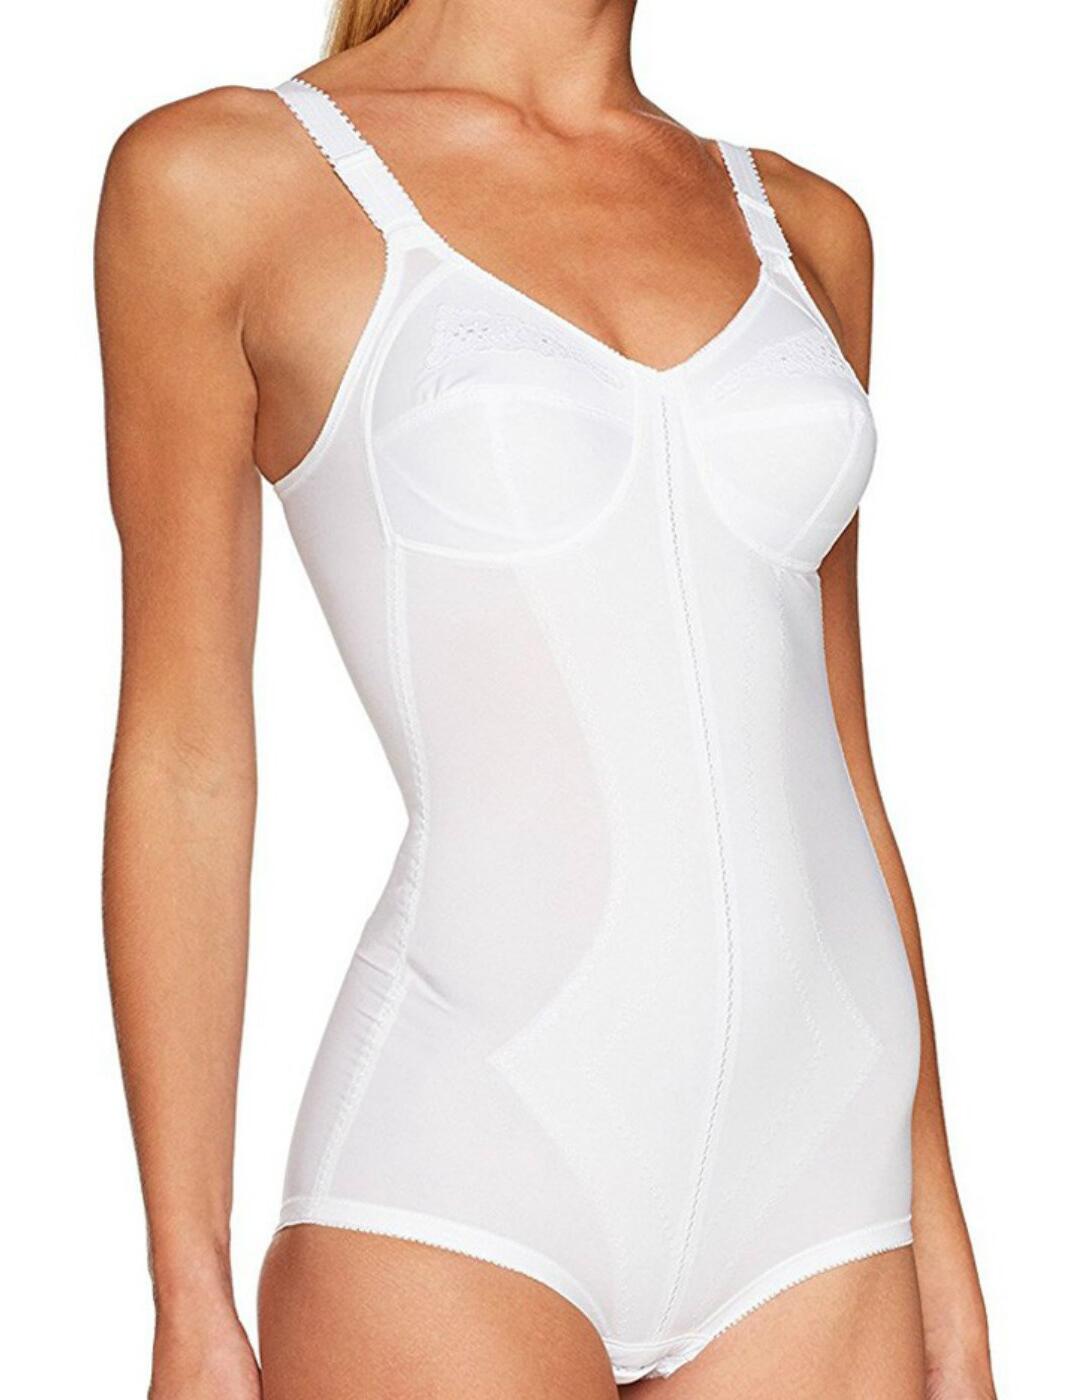 Playtex I Cant Believe Its A Girdle All In One Bodysuit White